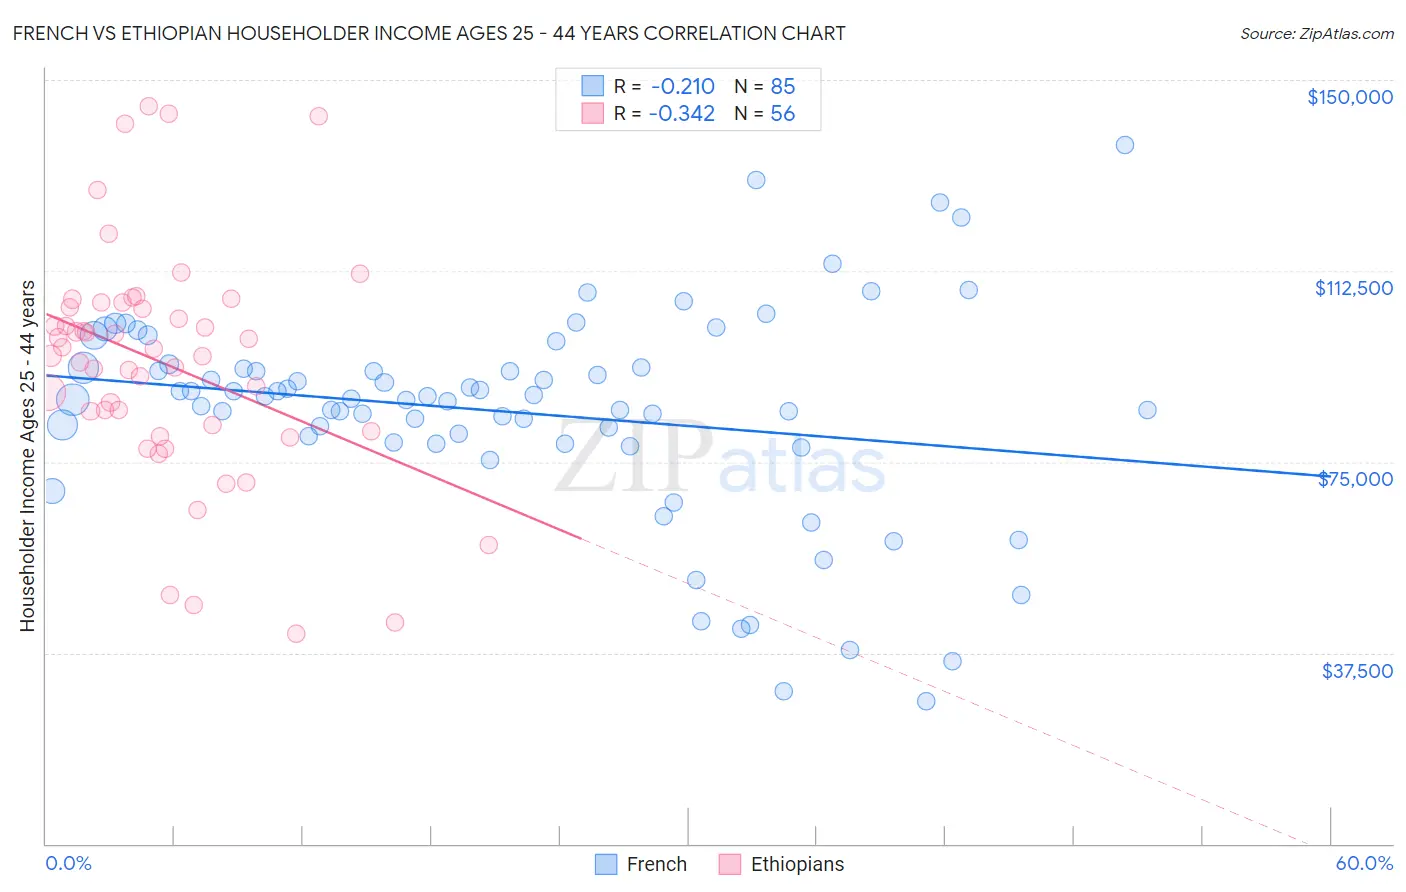 French vs Ethiopian Householder Income Ages 25 - 44 years